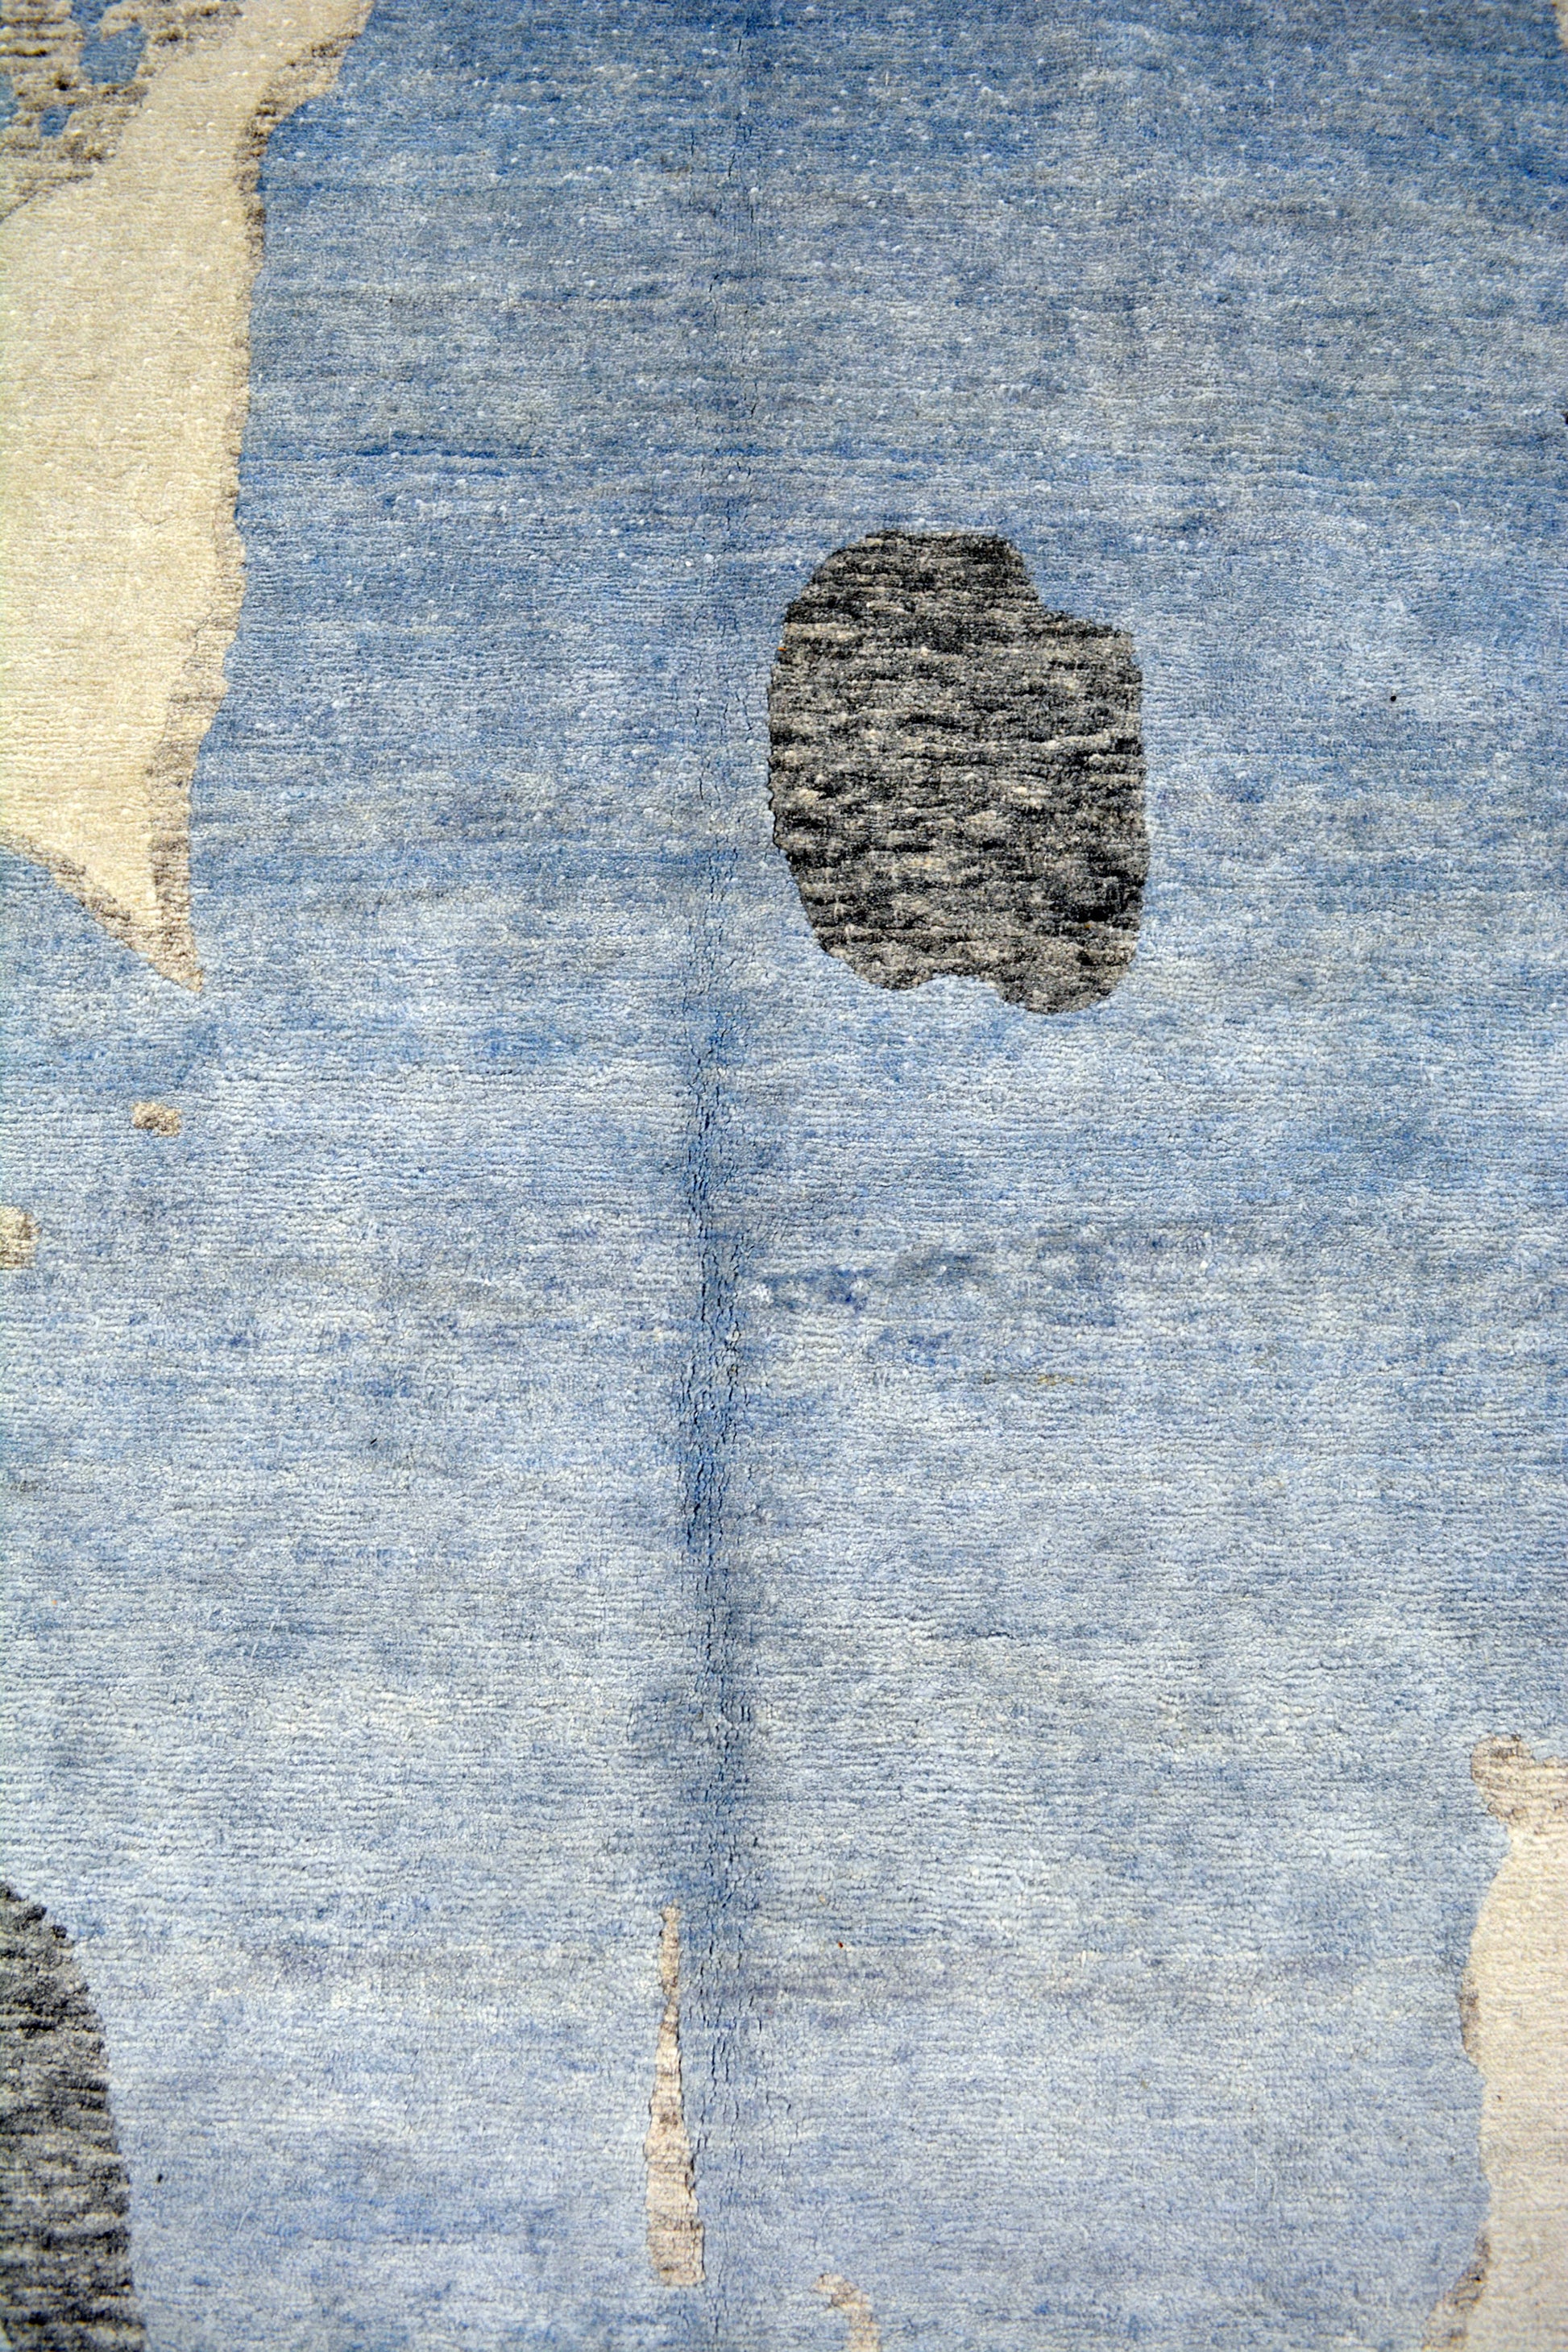 The center's close-up renders two blue daises together.